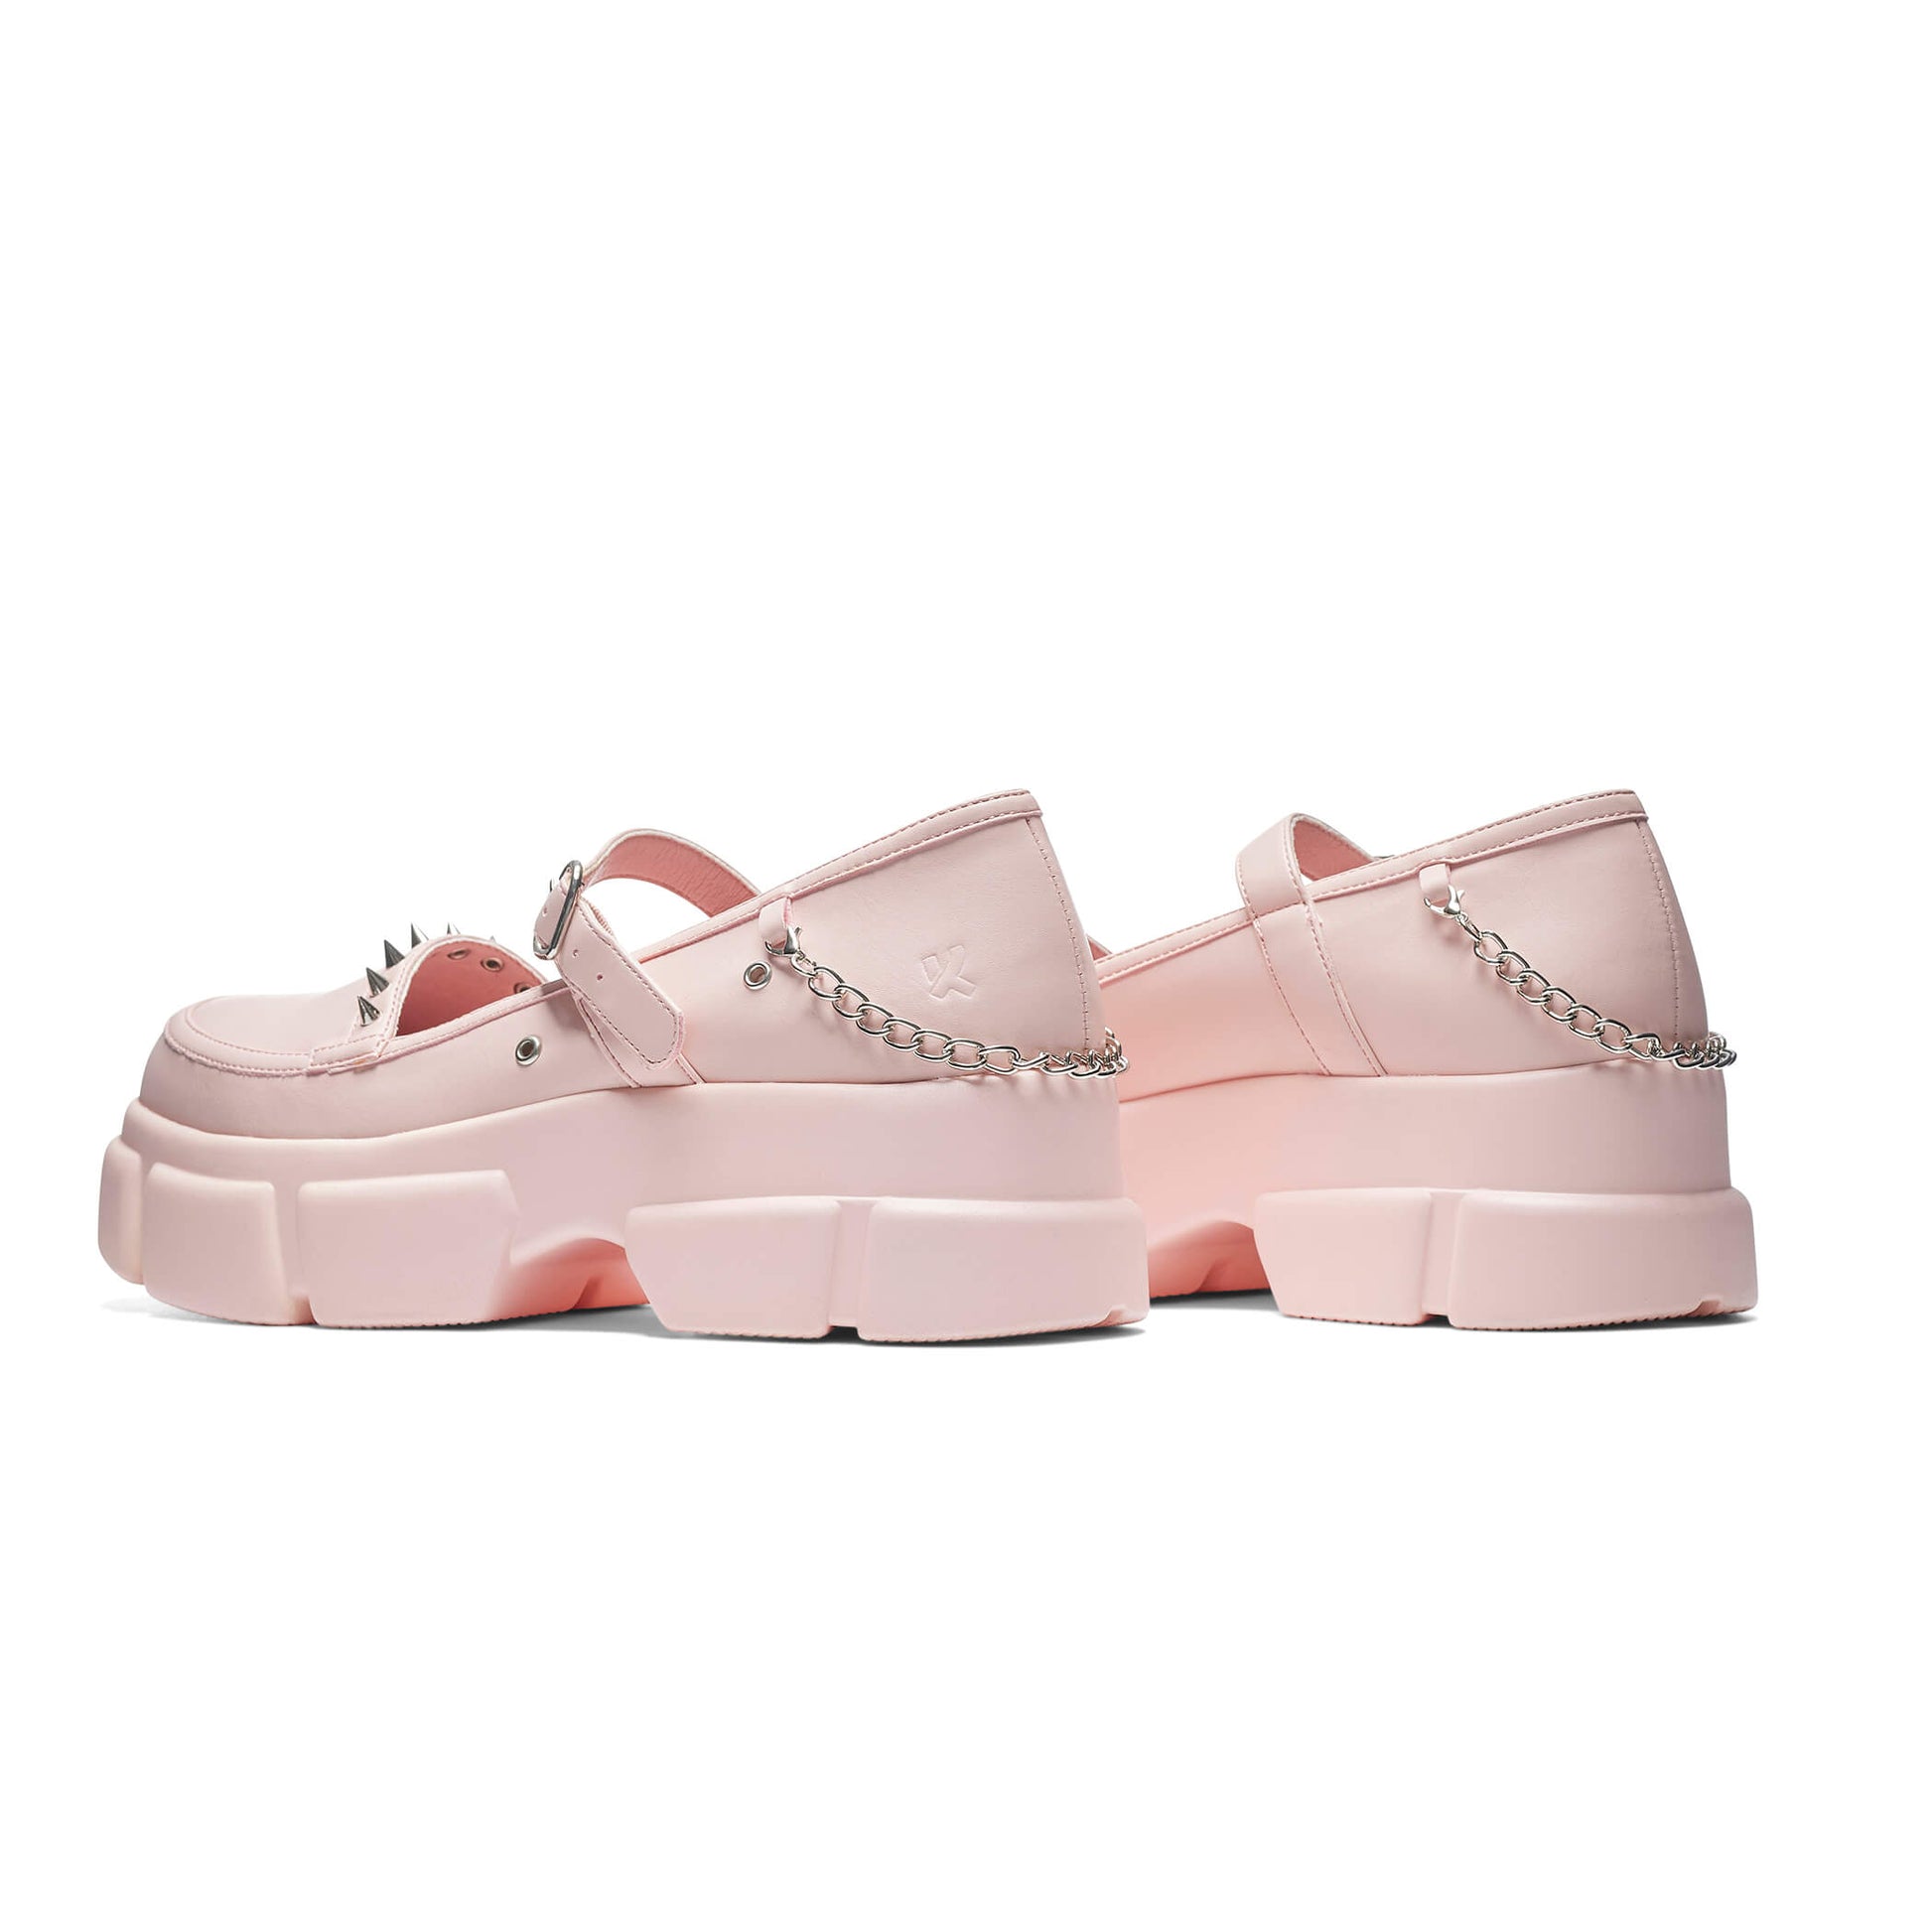 Cloud Mist Chunky Shoes - Baby Pink - Shoes - KOI Footwear - Pink - Back View